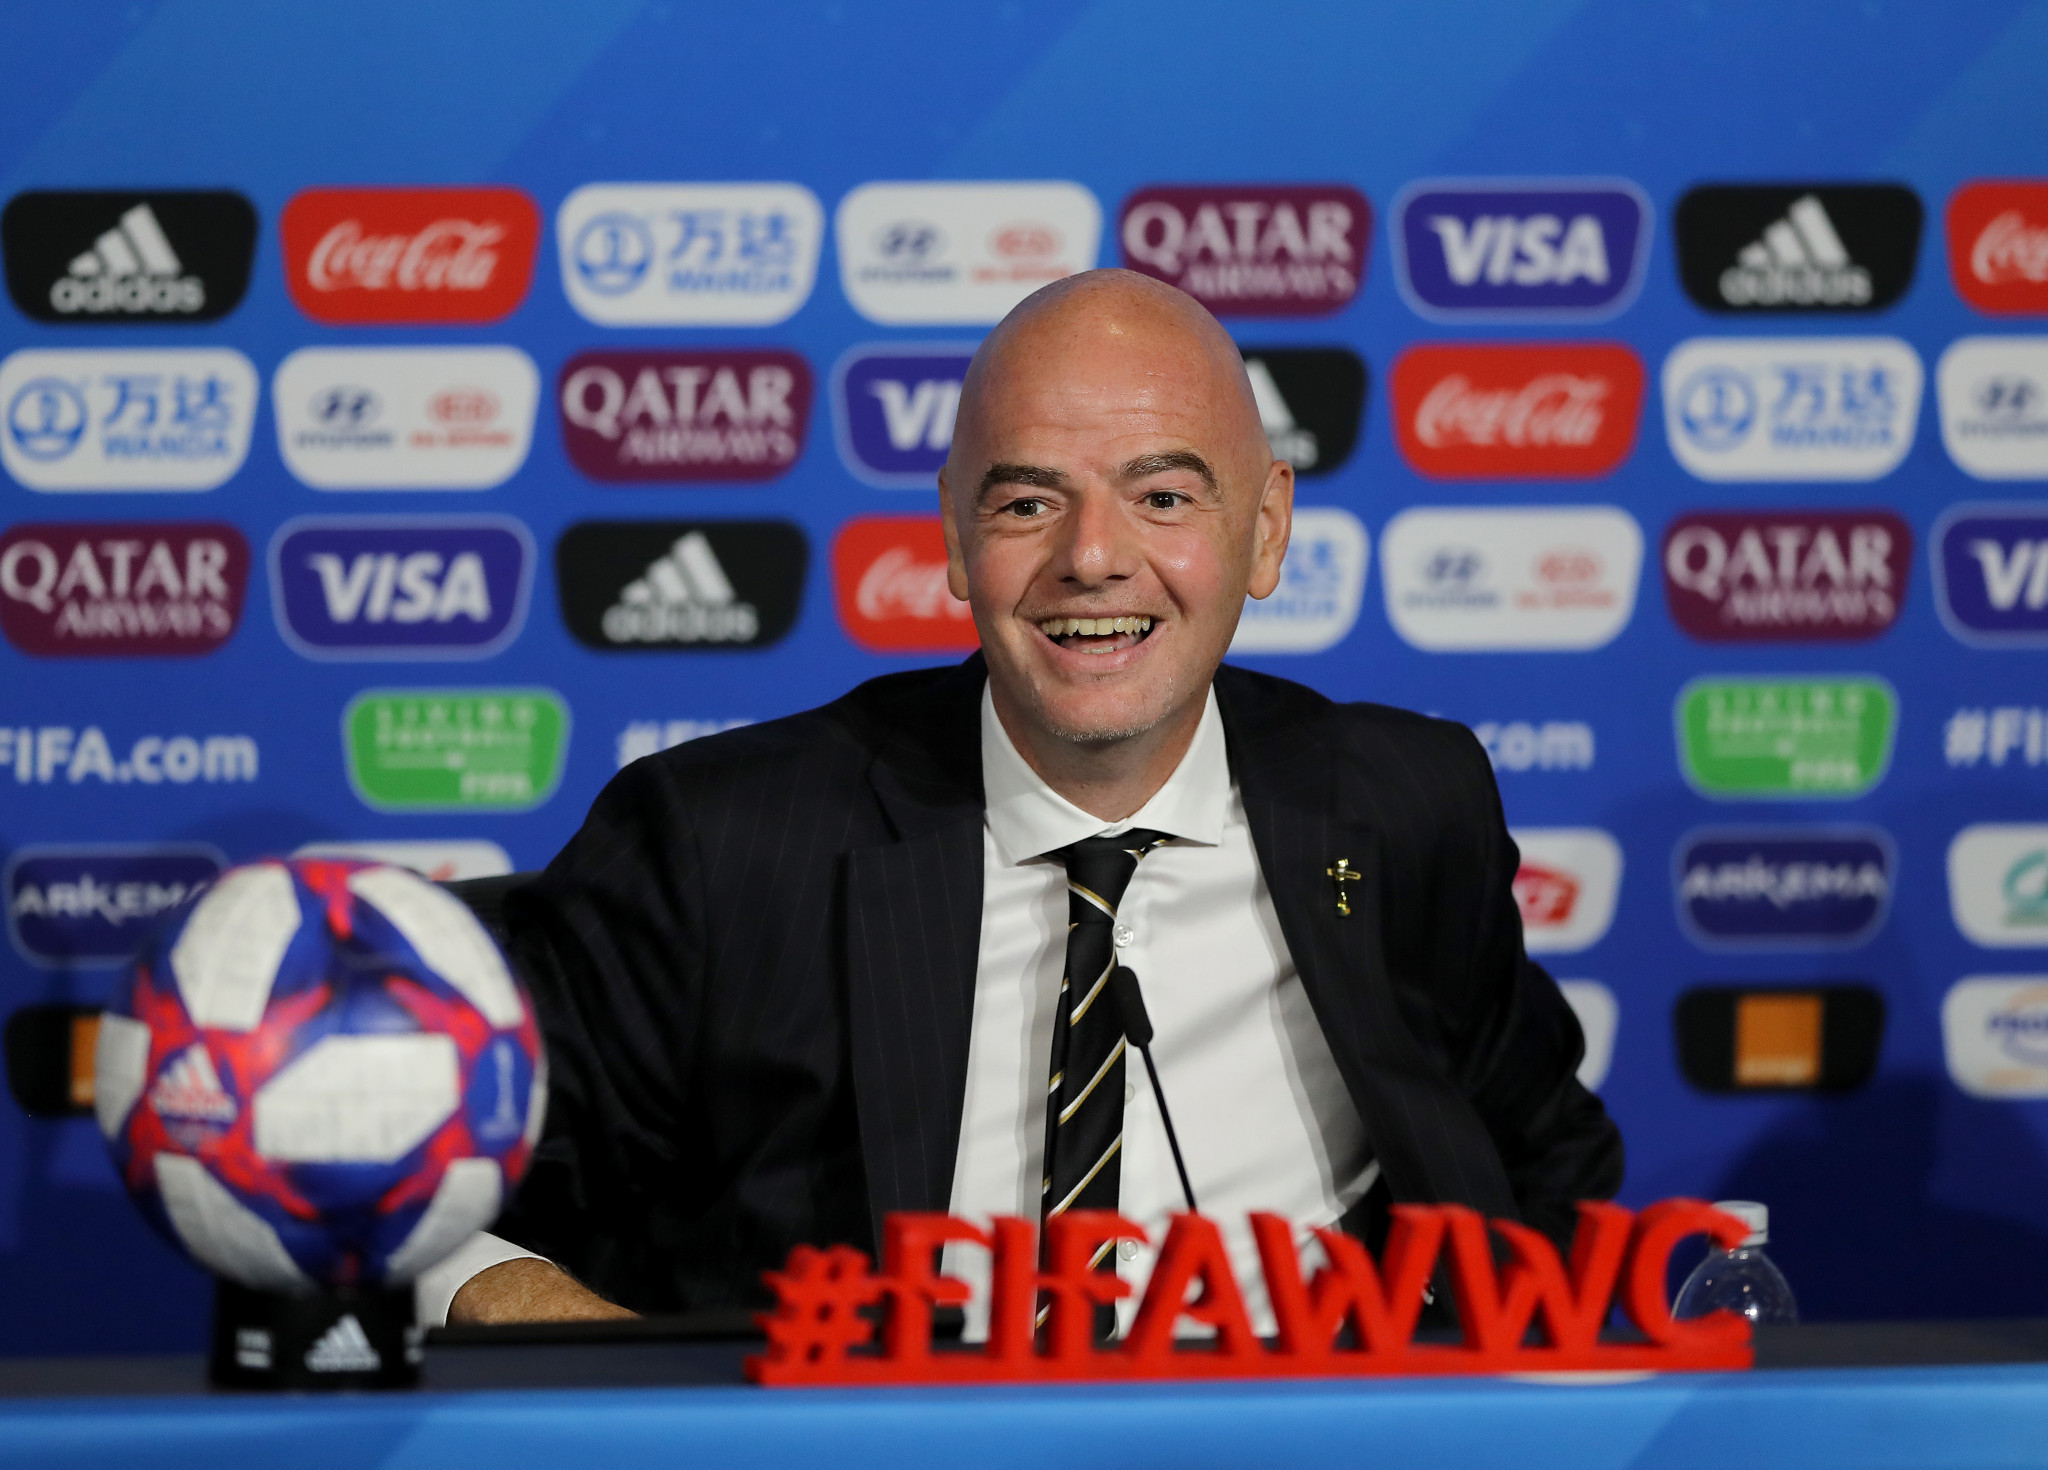 FIFA President Gianni Infantino heaped praise on the tournament prior to the final ©Getty Images